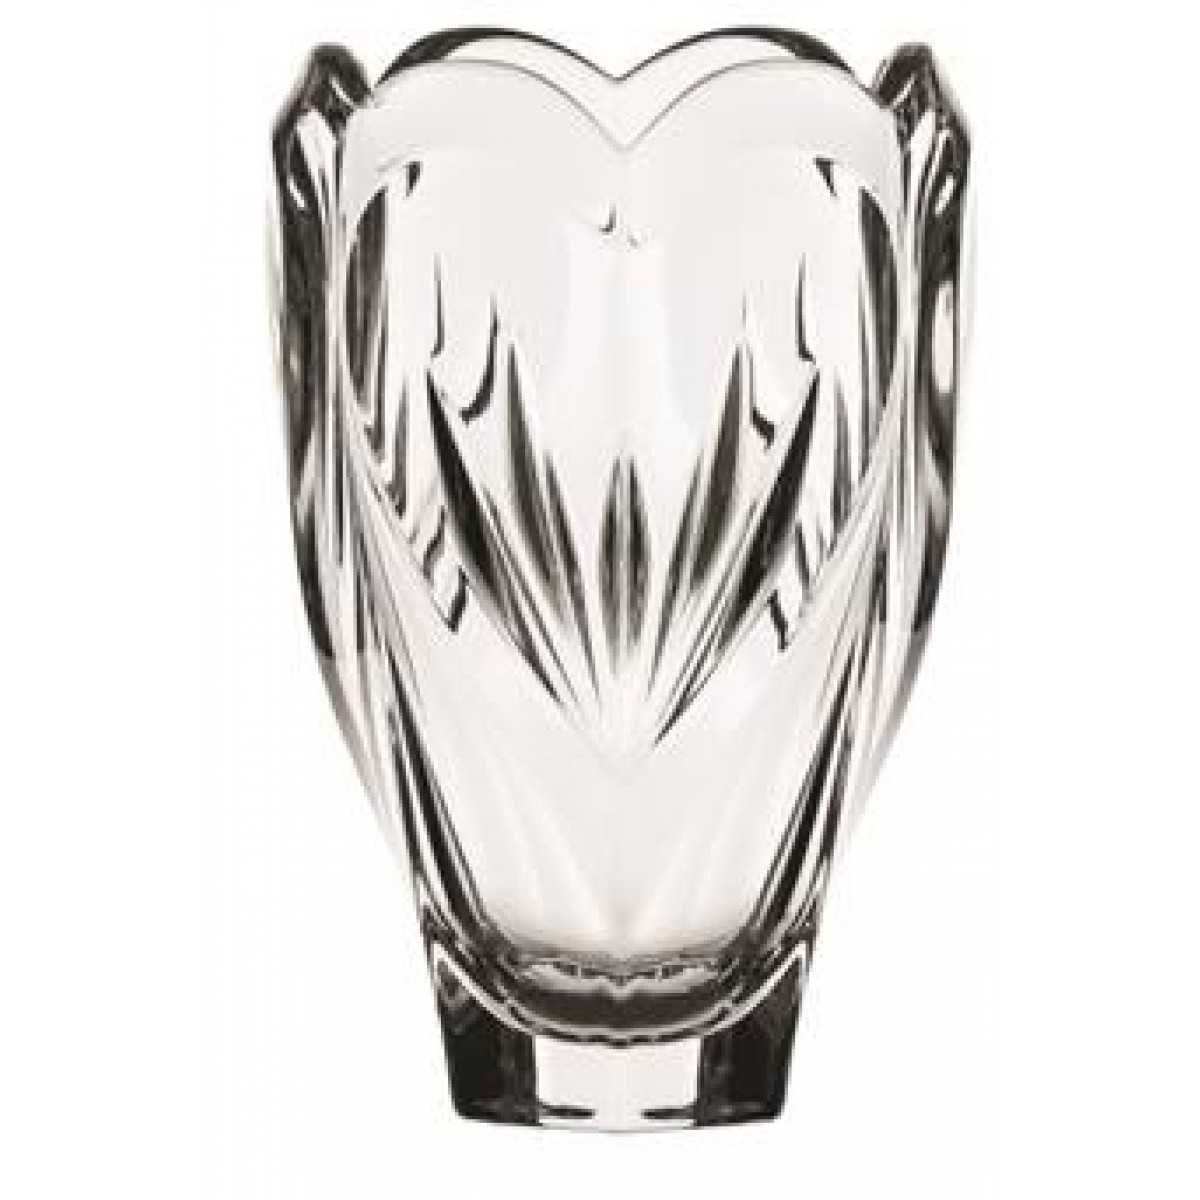 13 Lovable Waterford Marquis Markham Vase 2024 free download waterford marquis markham vase of heritage sweet memories clear 6 5in vase marquis by waterford us intended for heritage sweet memories clear 6 5in vase